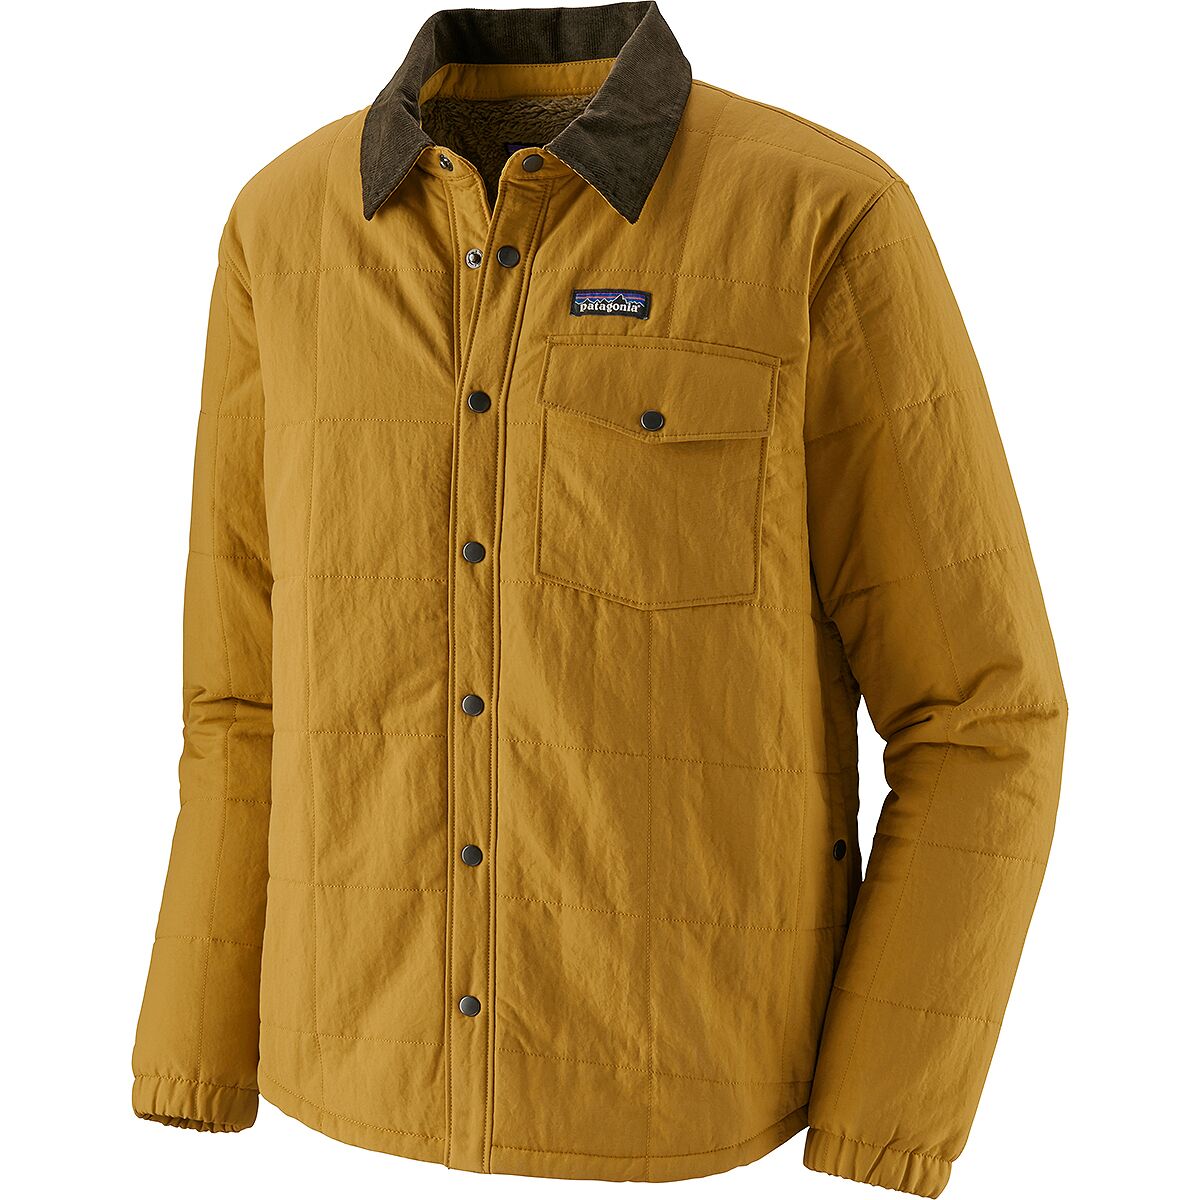 Patagonia Isthmus Quilted Shirt Jacket - Men's - Clothing